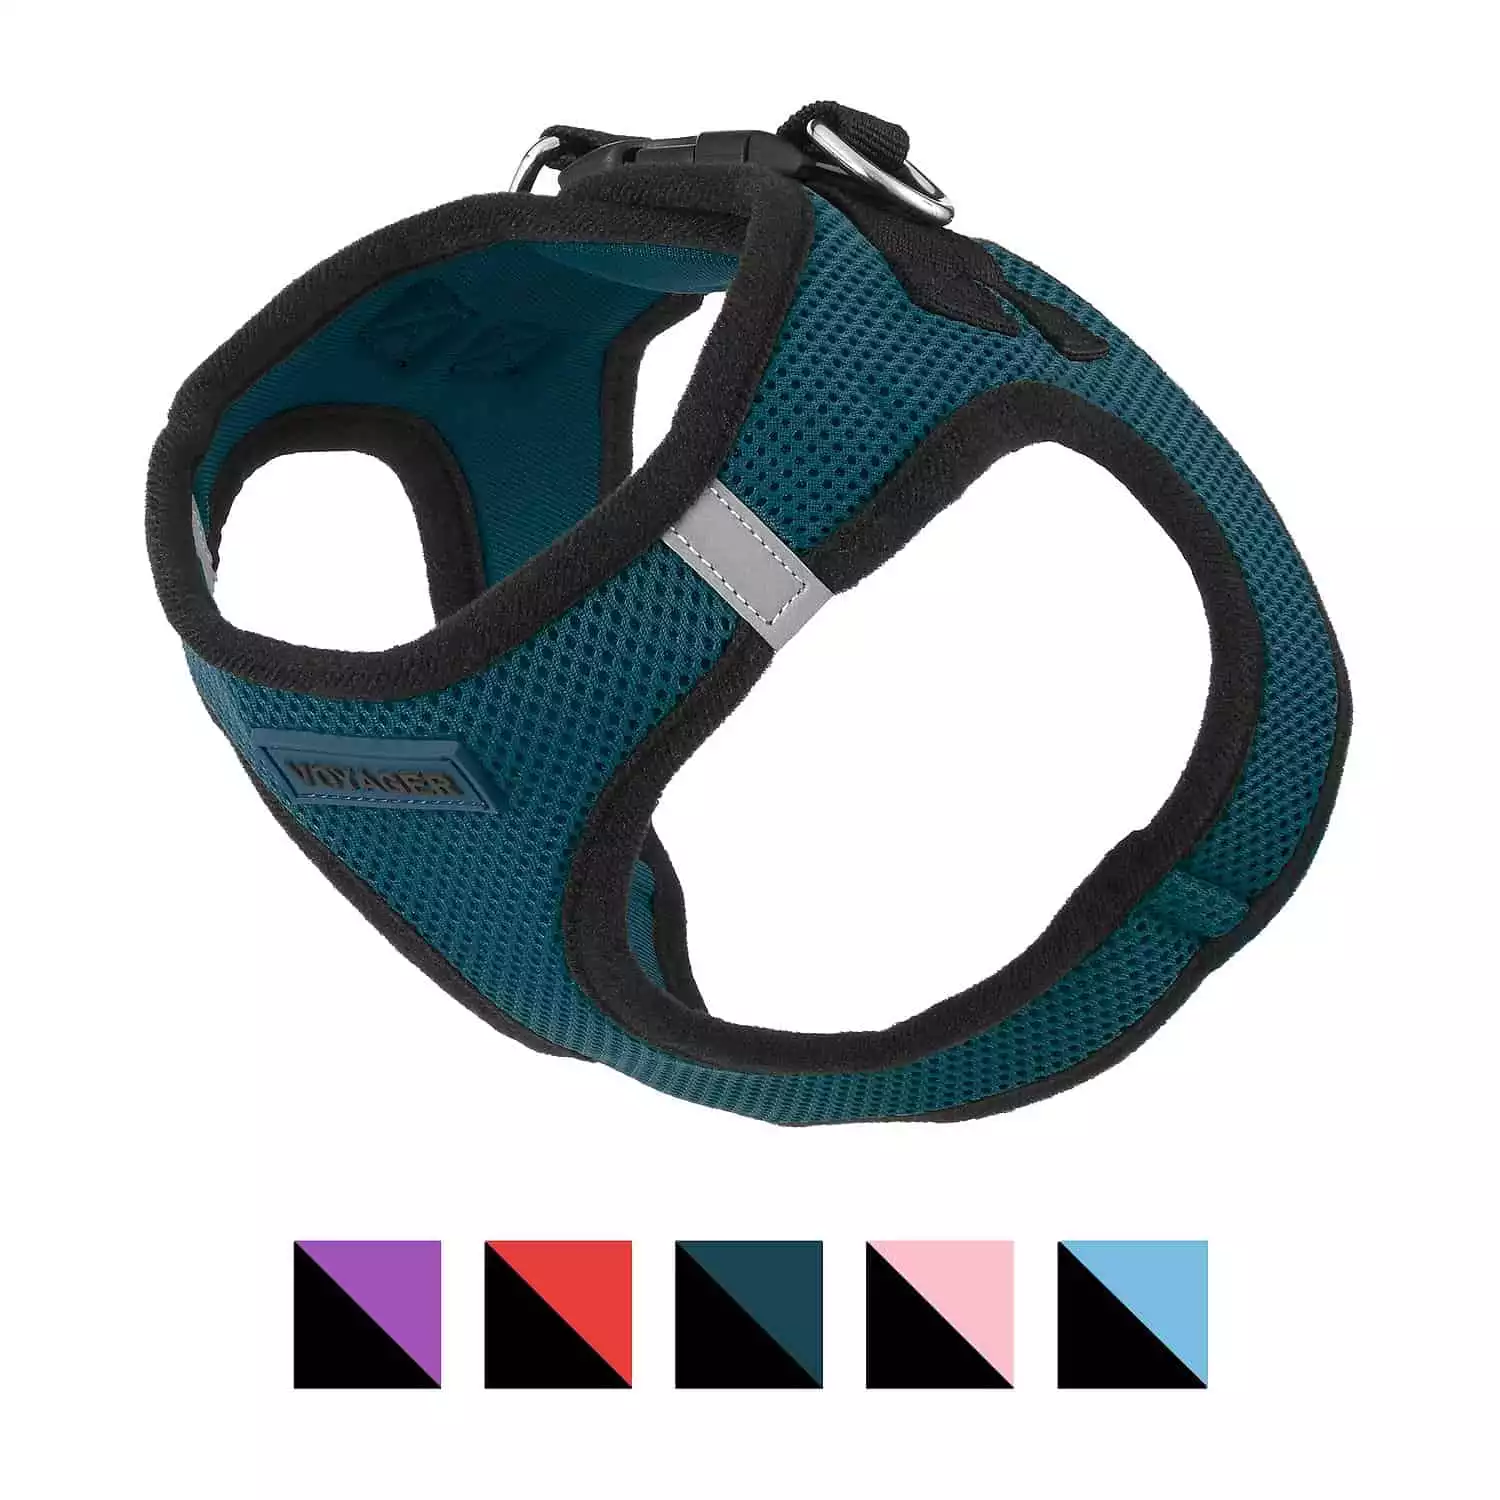 Voyager Step-In Air Dog Harness